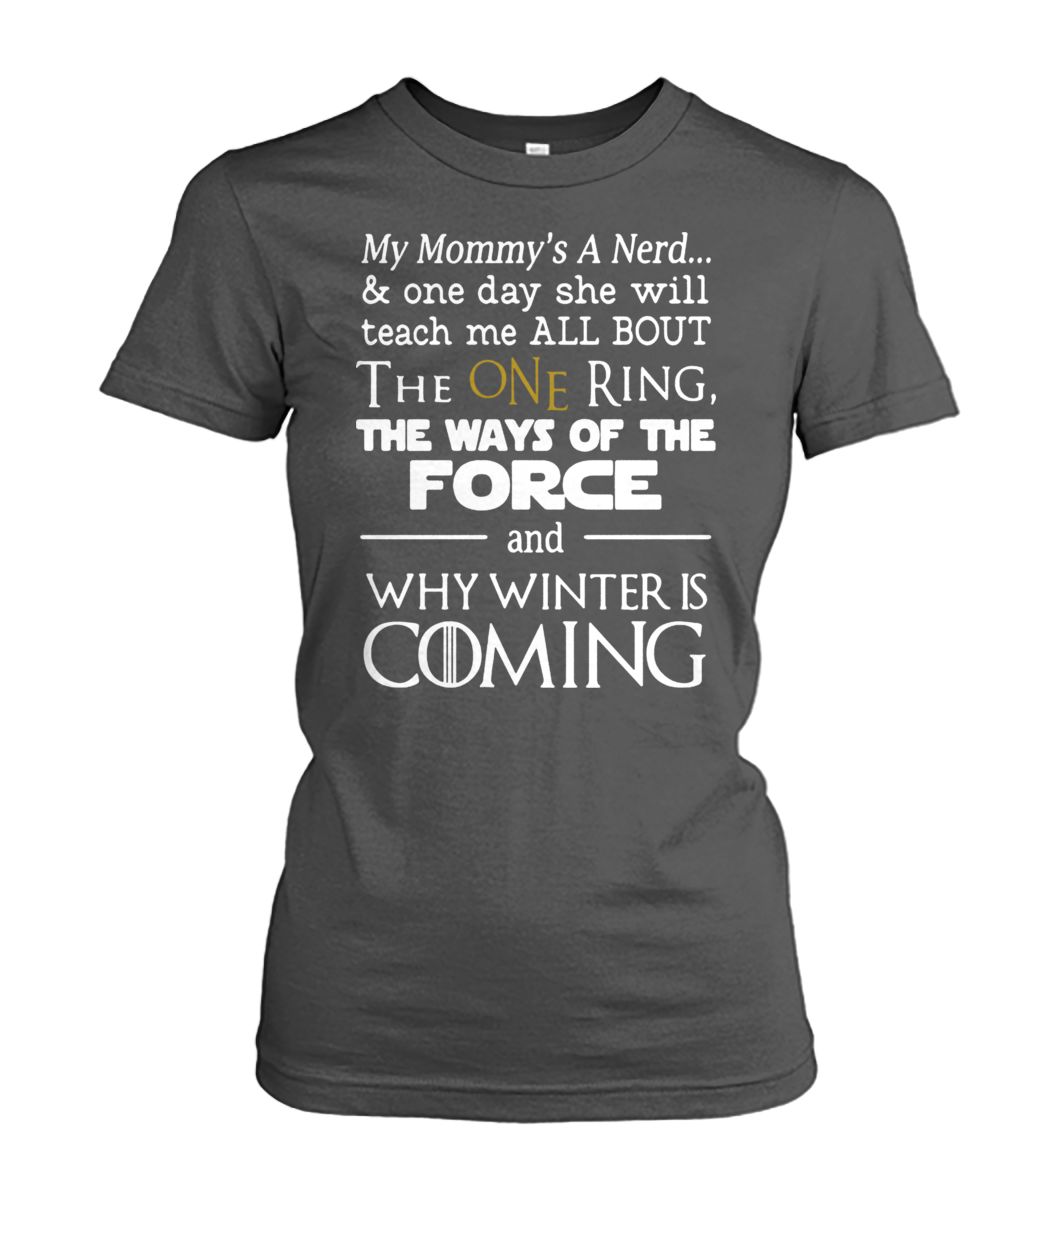 Game of thrones my mommy's a nerd and why winter is coming women's crew tee